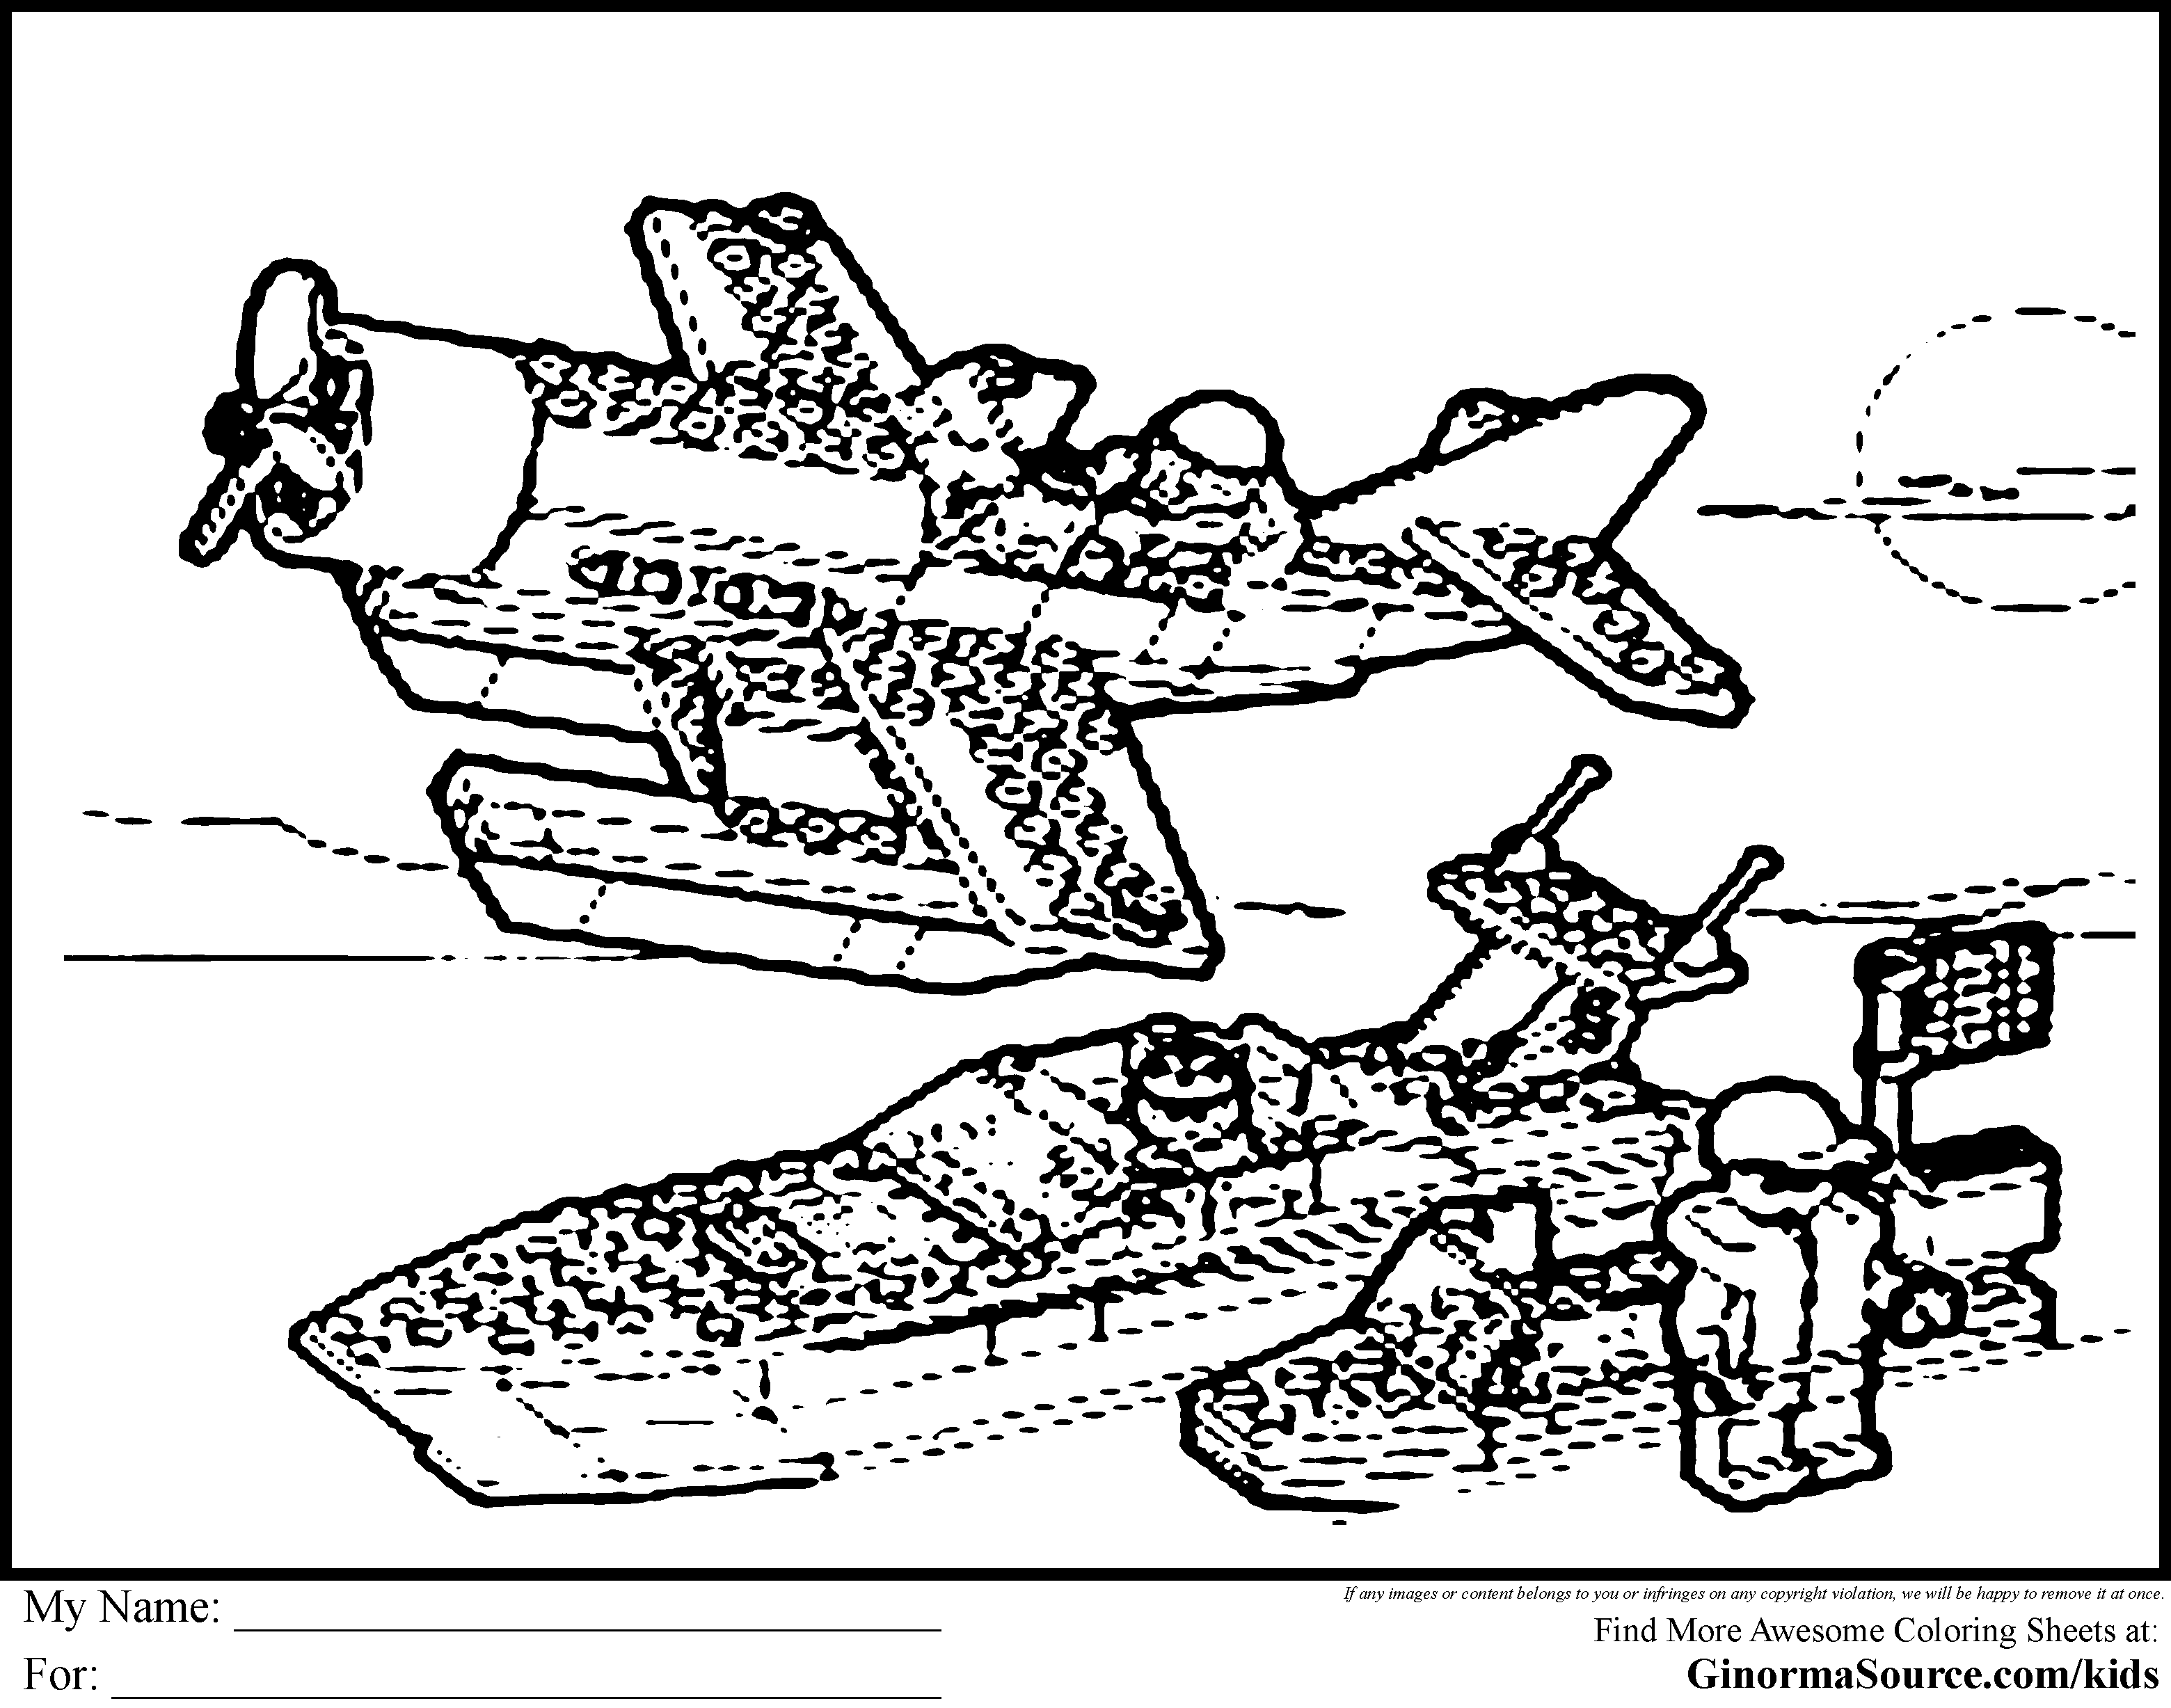 Free Coloring Page Lego City, Download Free Coloring Page Lego City png